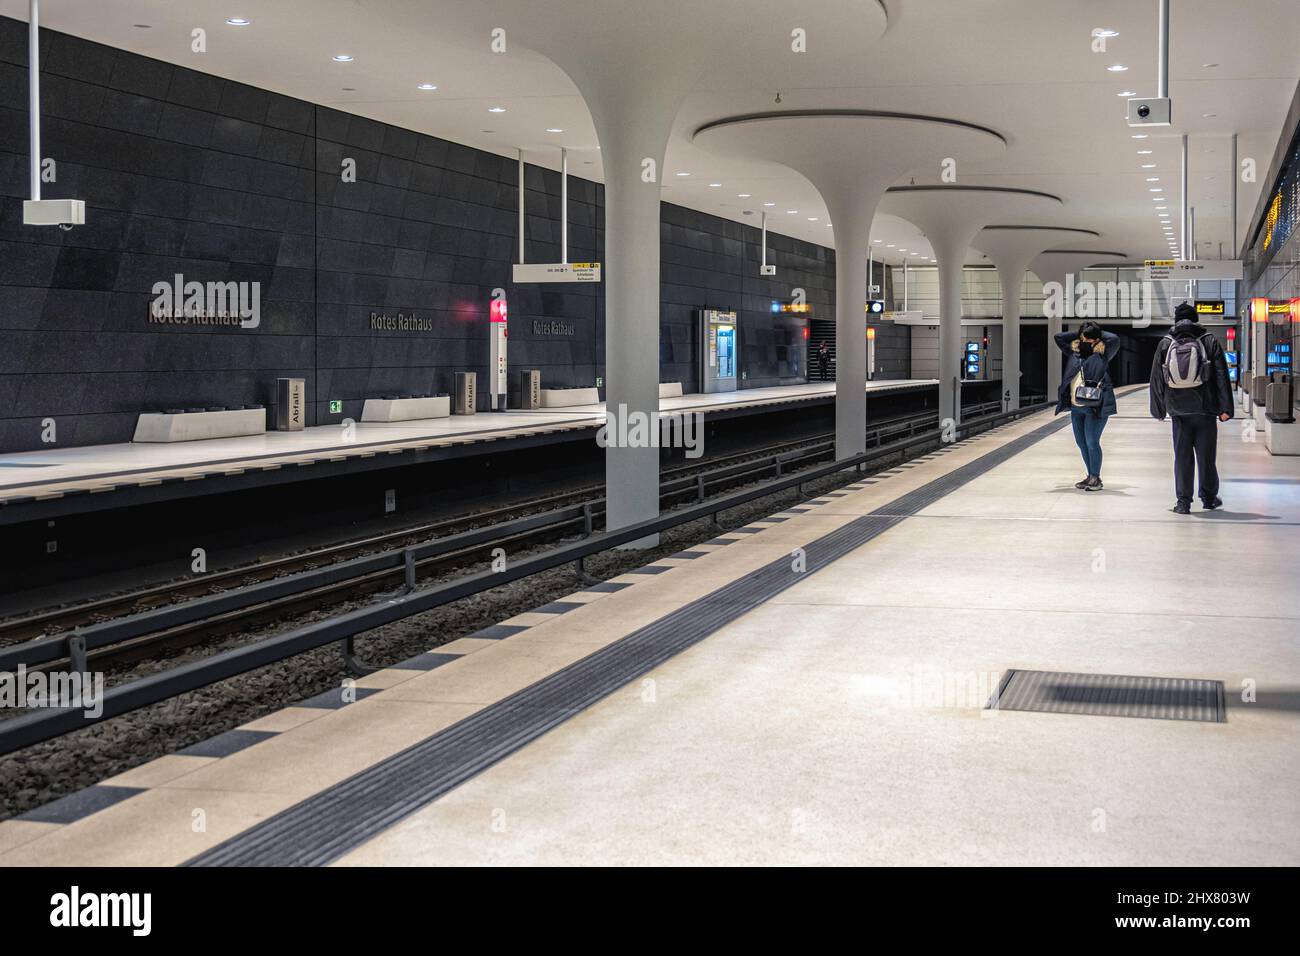 Alexanderplatz, Berlin-Mitte, Germany. New Rotes Rathaus underground U-Bahn railway station interior - extension of U5 line in front of Town hall opened 4 December 2020. U5 line now runs from Hönow to the Hauptbahnhof. Stock Photo